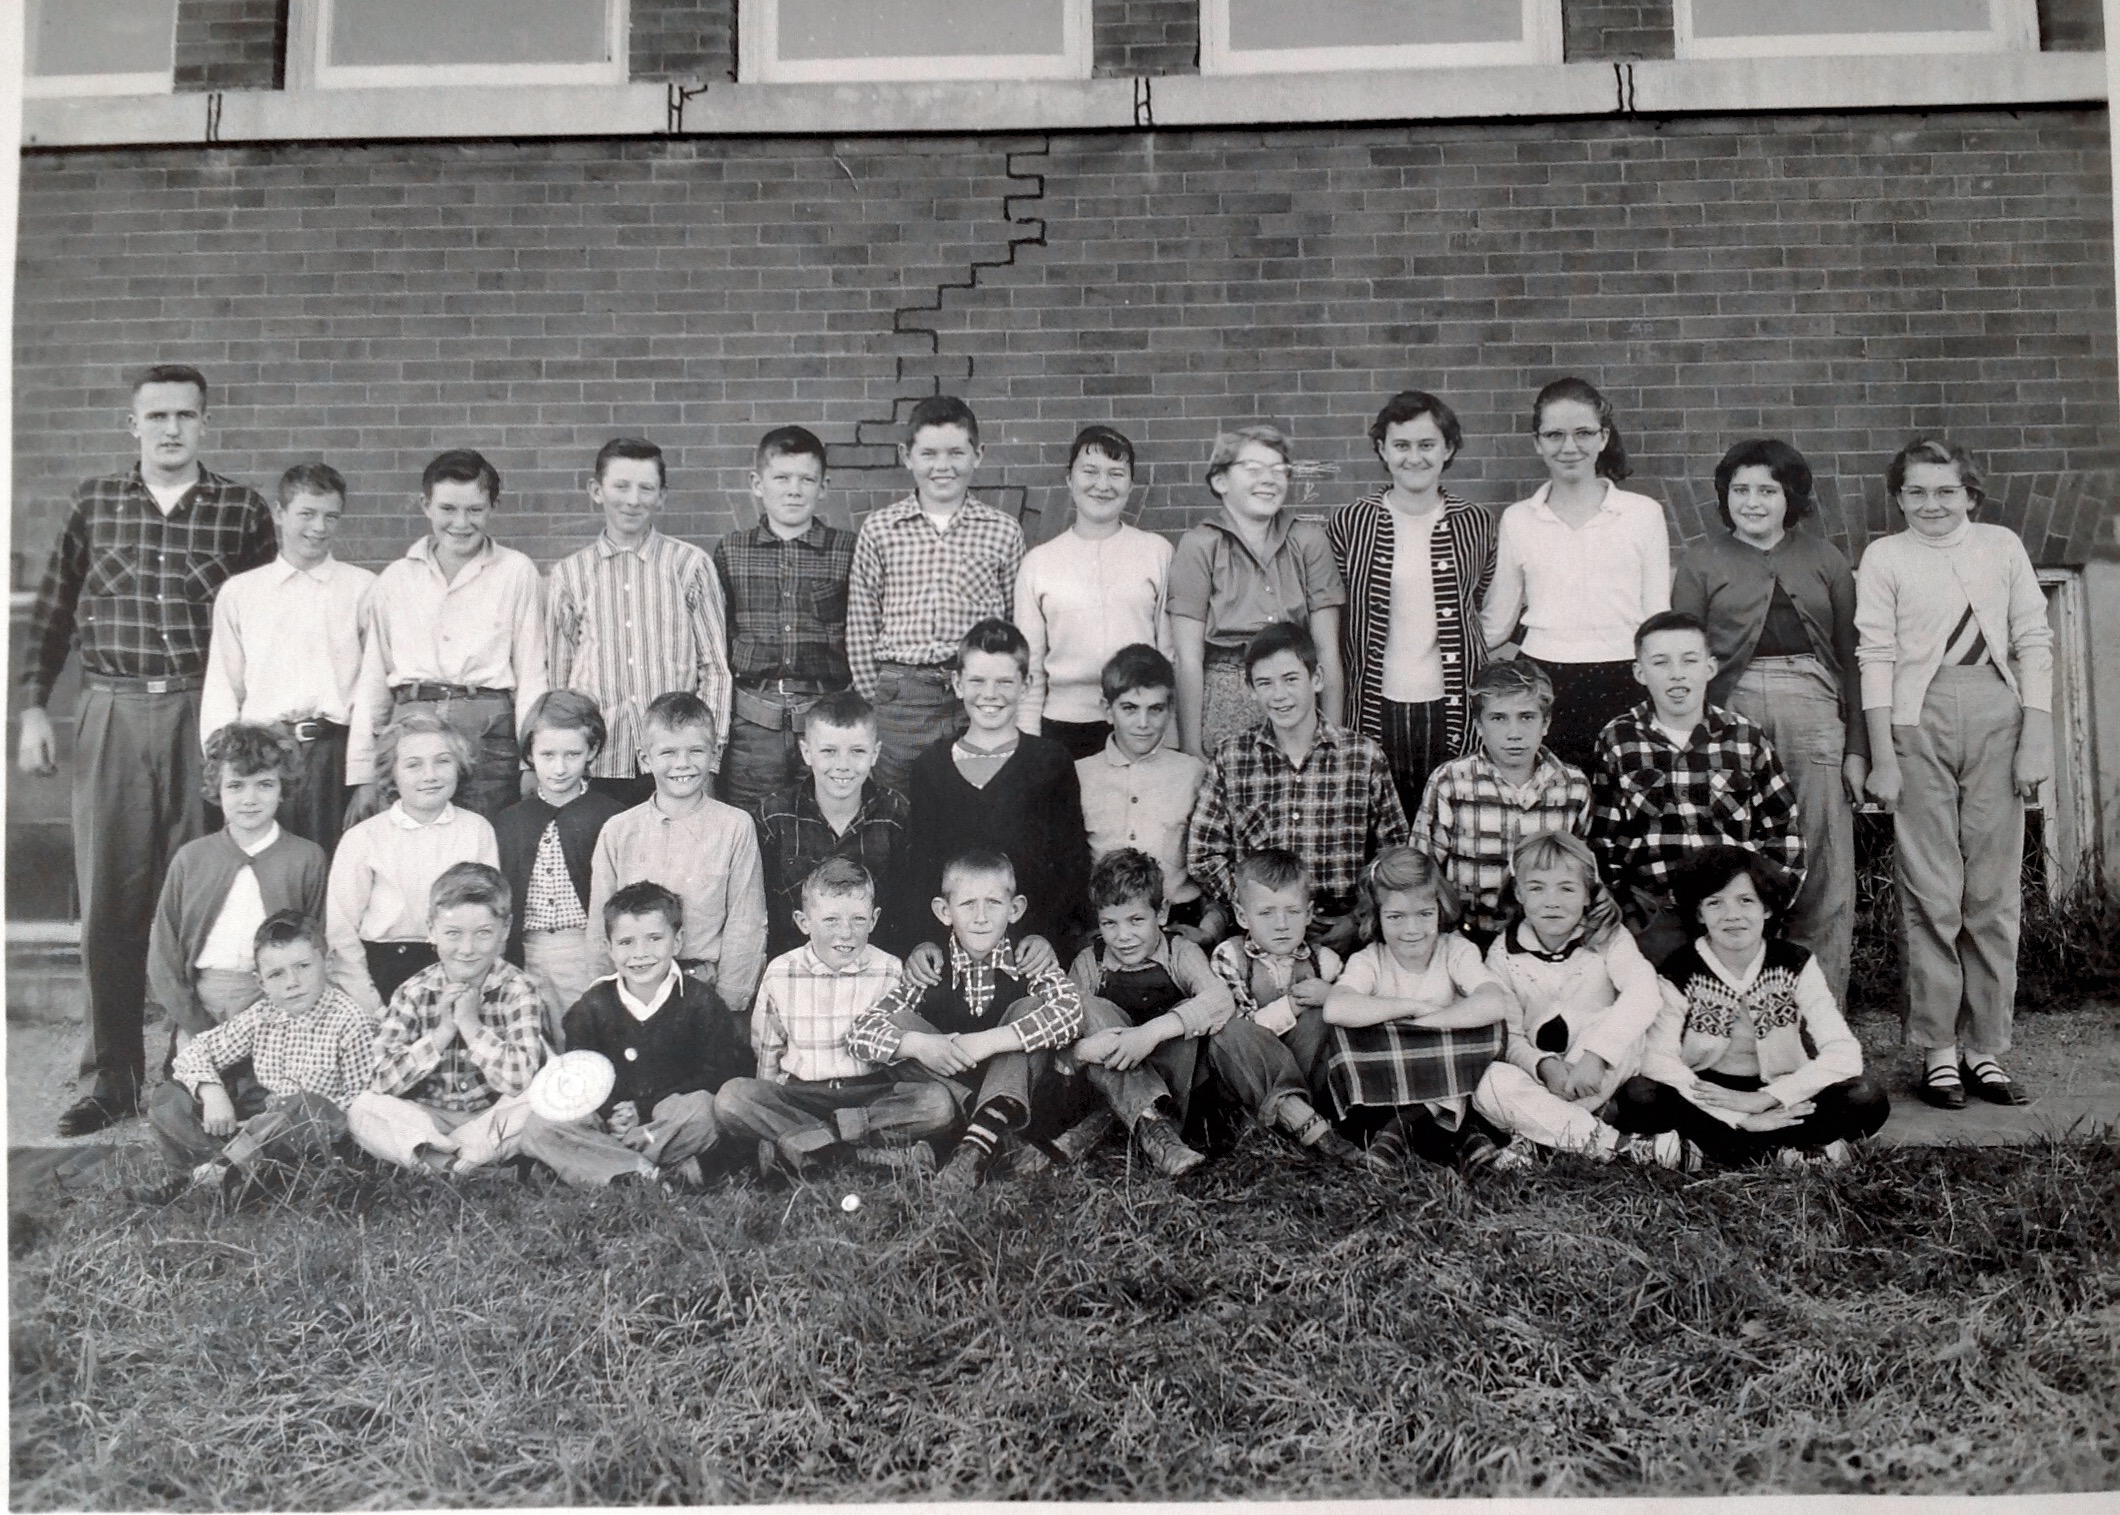 Grade I SS#8 Matchedash Schoolon, .  Pump outside, used coal to heat so lots of cinder blocks to get hurt on.  Had an indoor outside for use.  This was 1957.